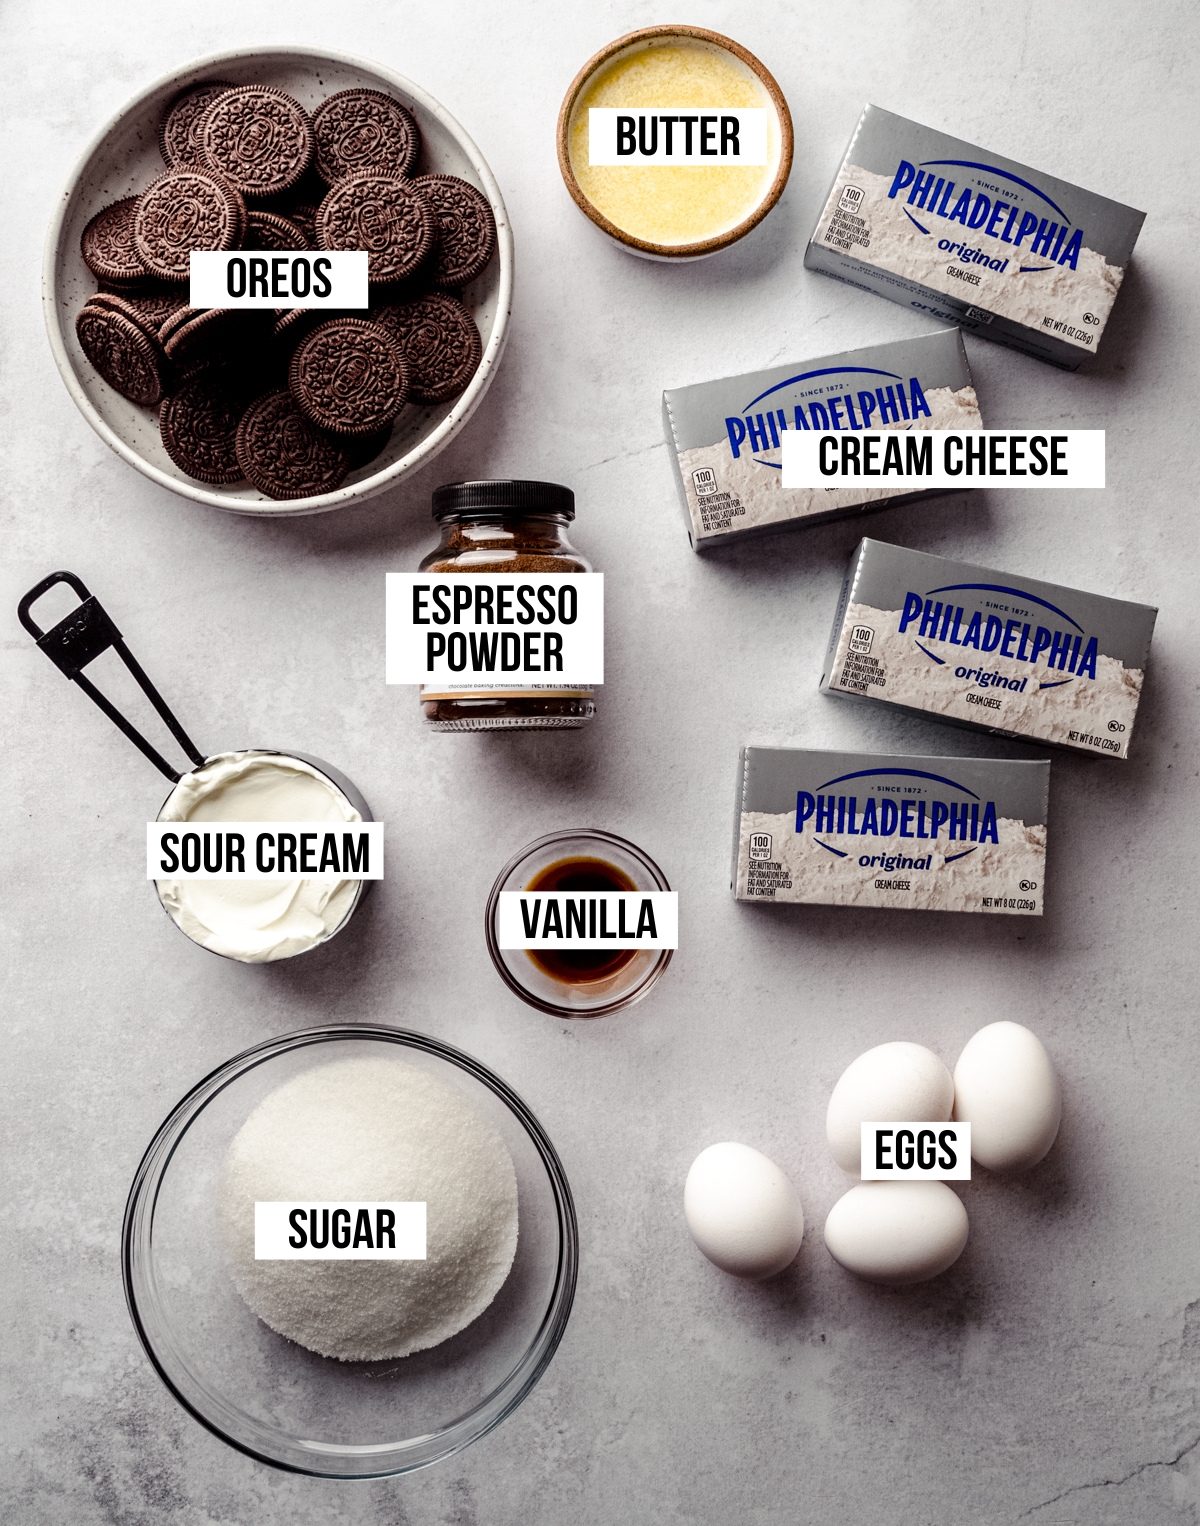 Aerial photo of ingredients for coffee cheesecake with text overlay labeling each ingredient.